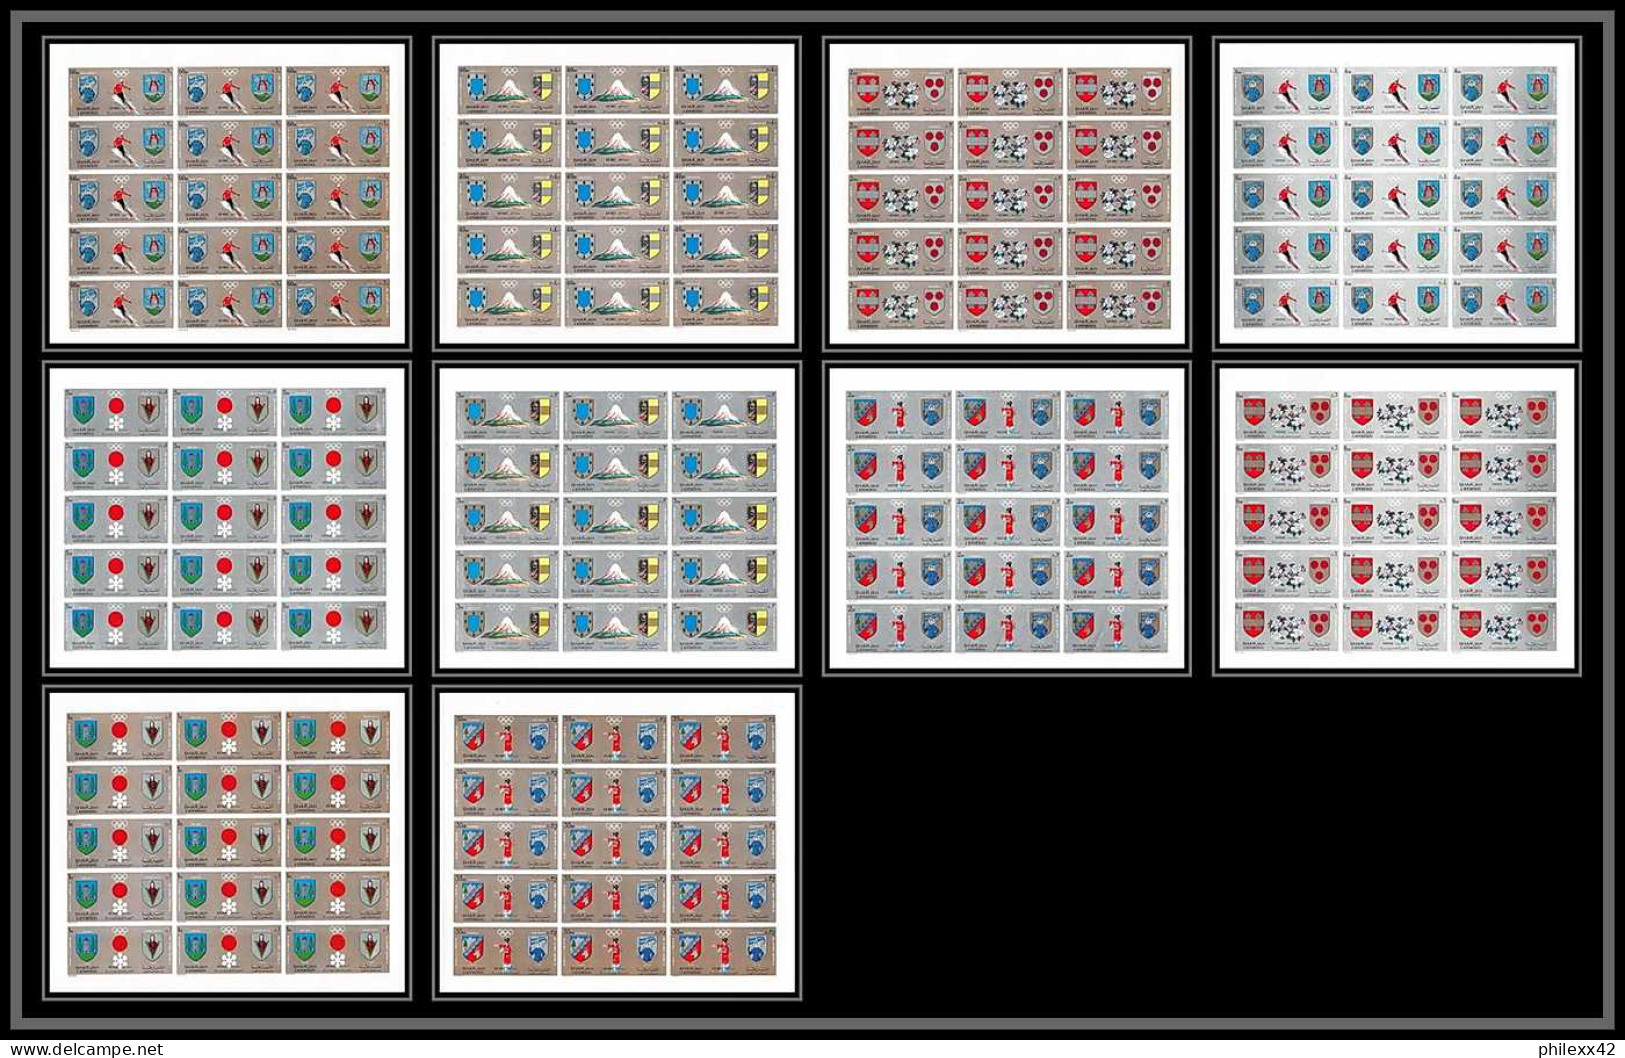 100c Sharjah MNH ** N° 825 / 834 B Non Dentelé (Imperf) Jeux Olympiques (olympic Games) Sapporo 72 Feuilles Sheets - Winter 1972: Sapporo